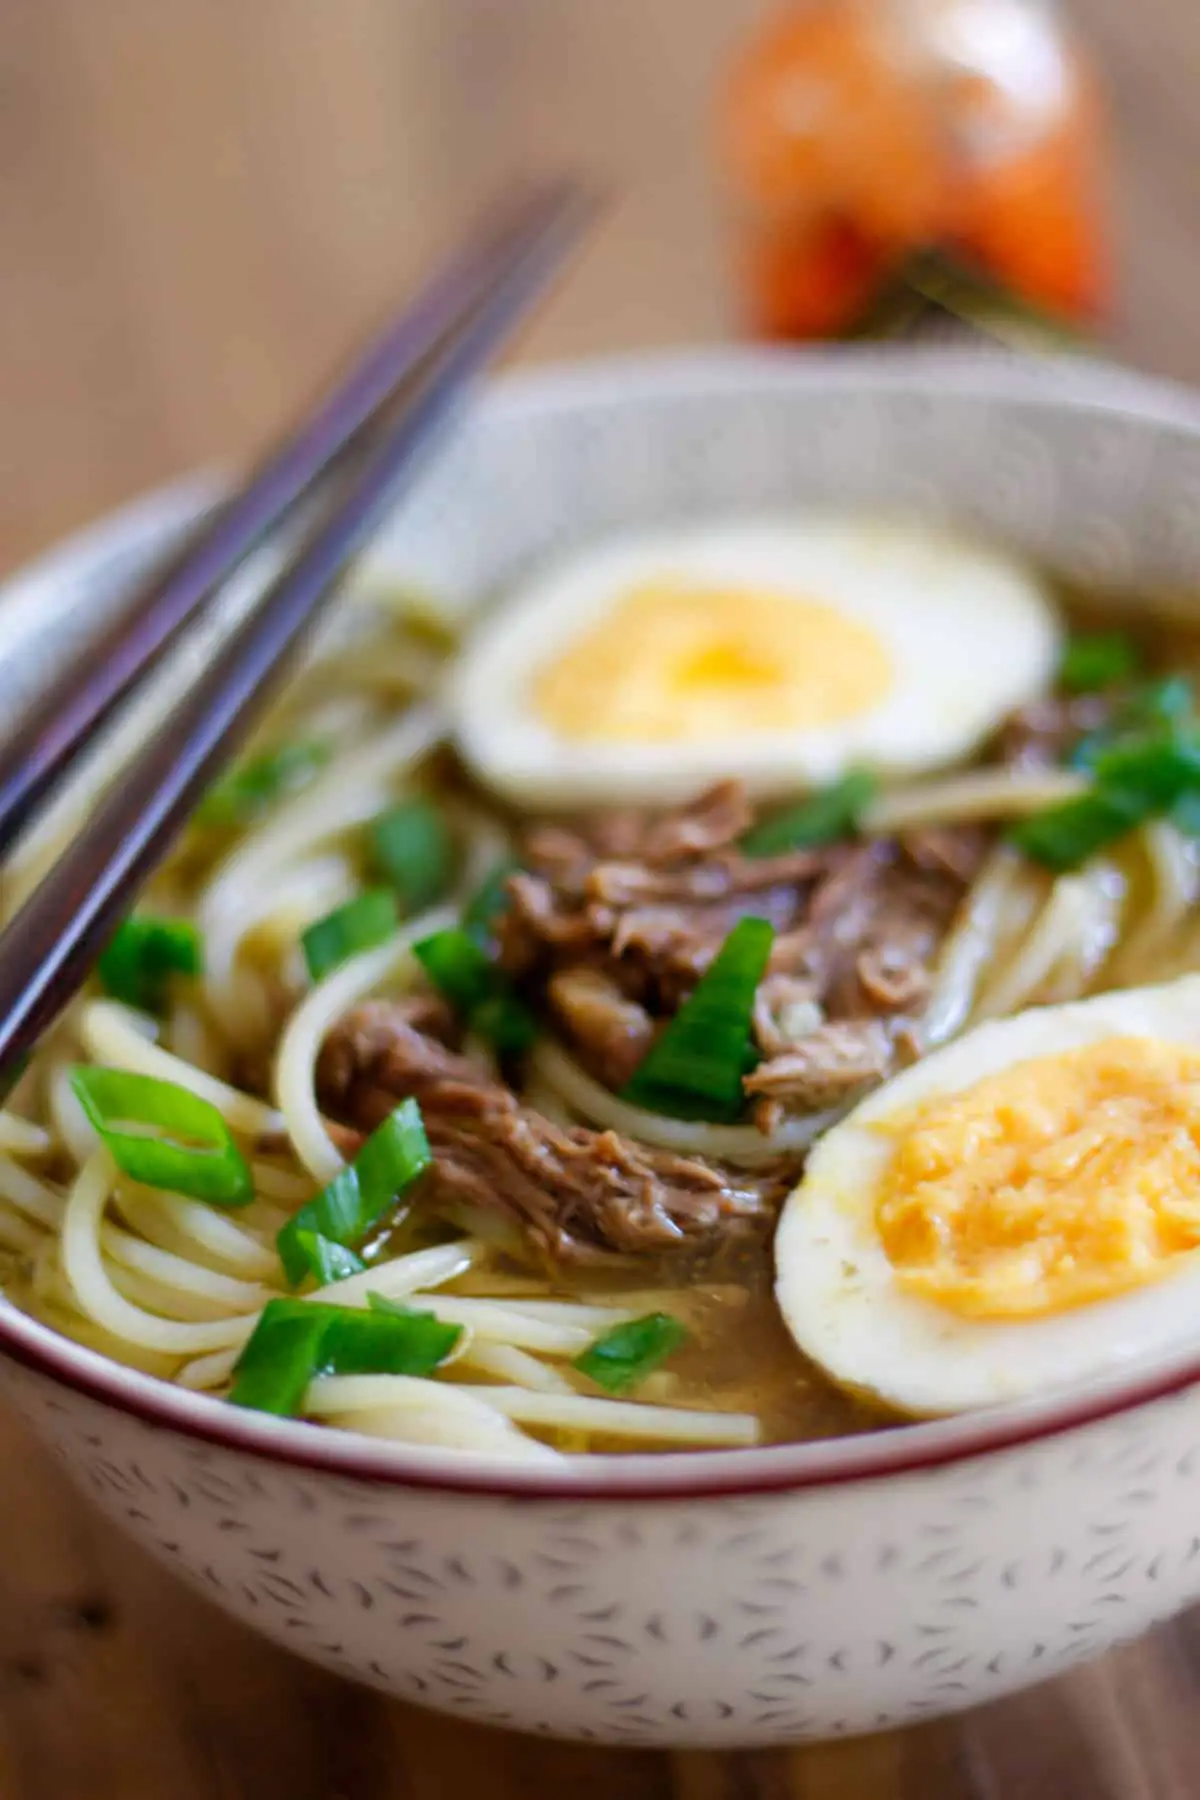 Shredded beef and noodles in a beef broth with hard boiled eggs which have been halved and green onions garnishing the noodle soup which was placed in a soup bowl with chopsticks resting on the bowl and a bottle of Tabasco in the background.